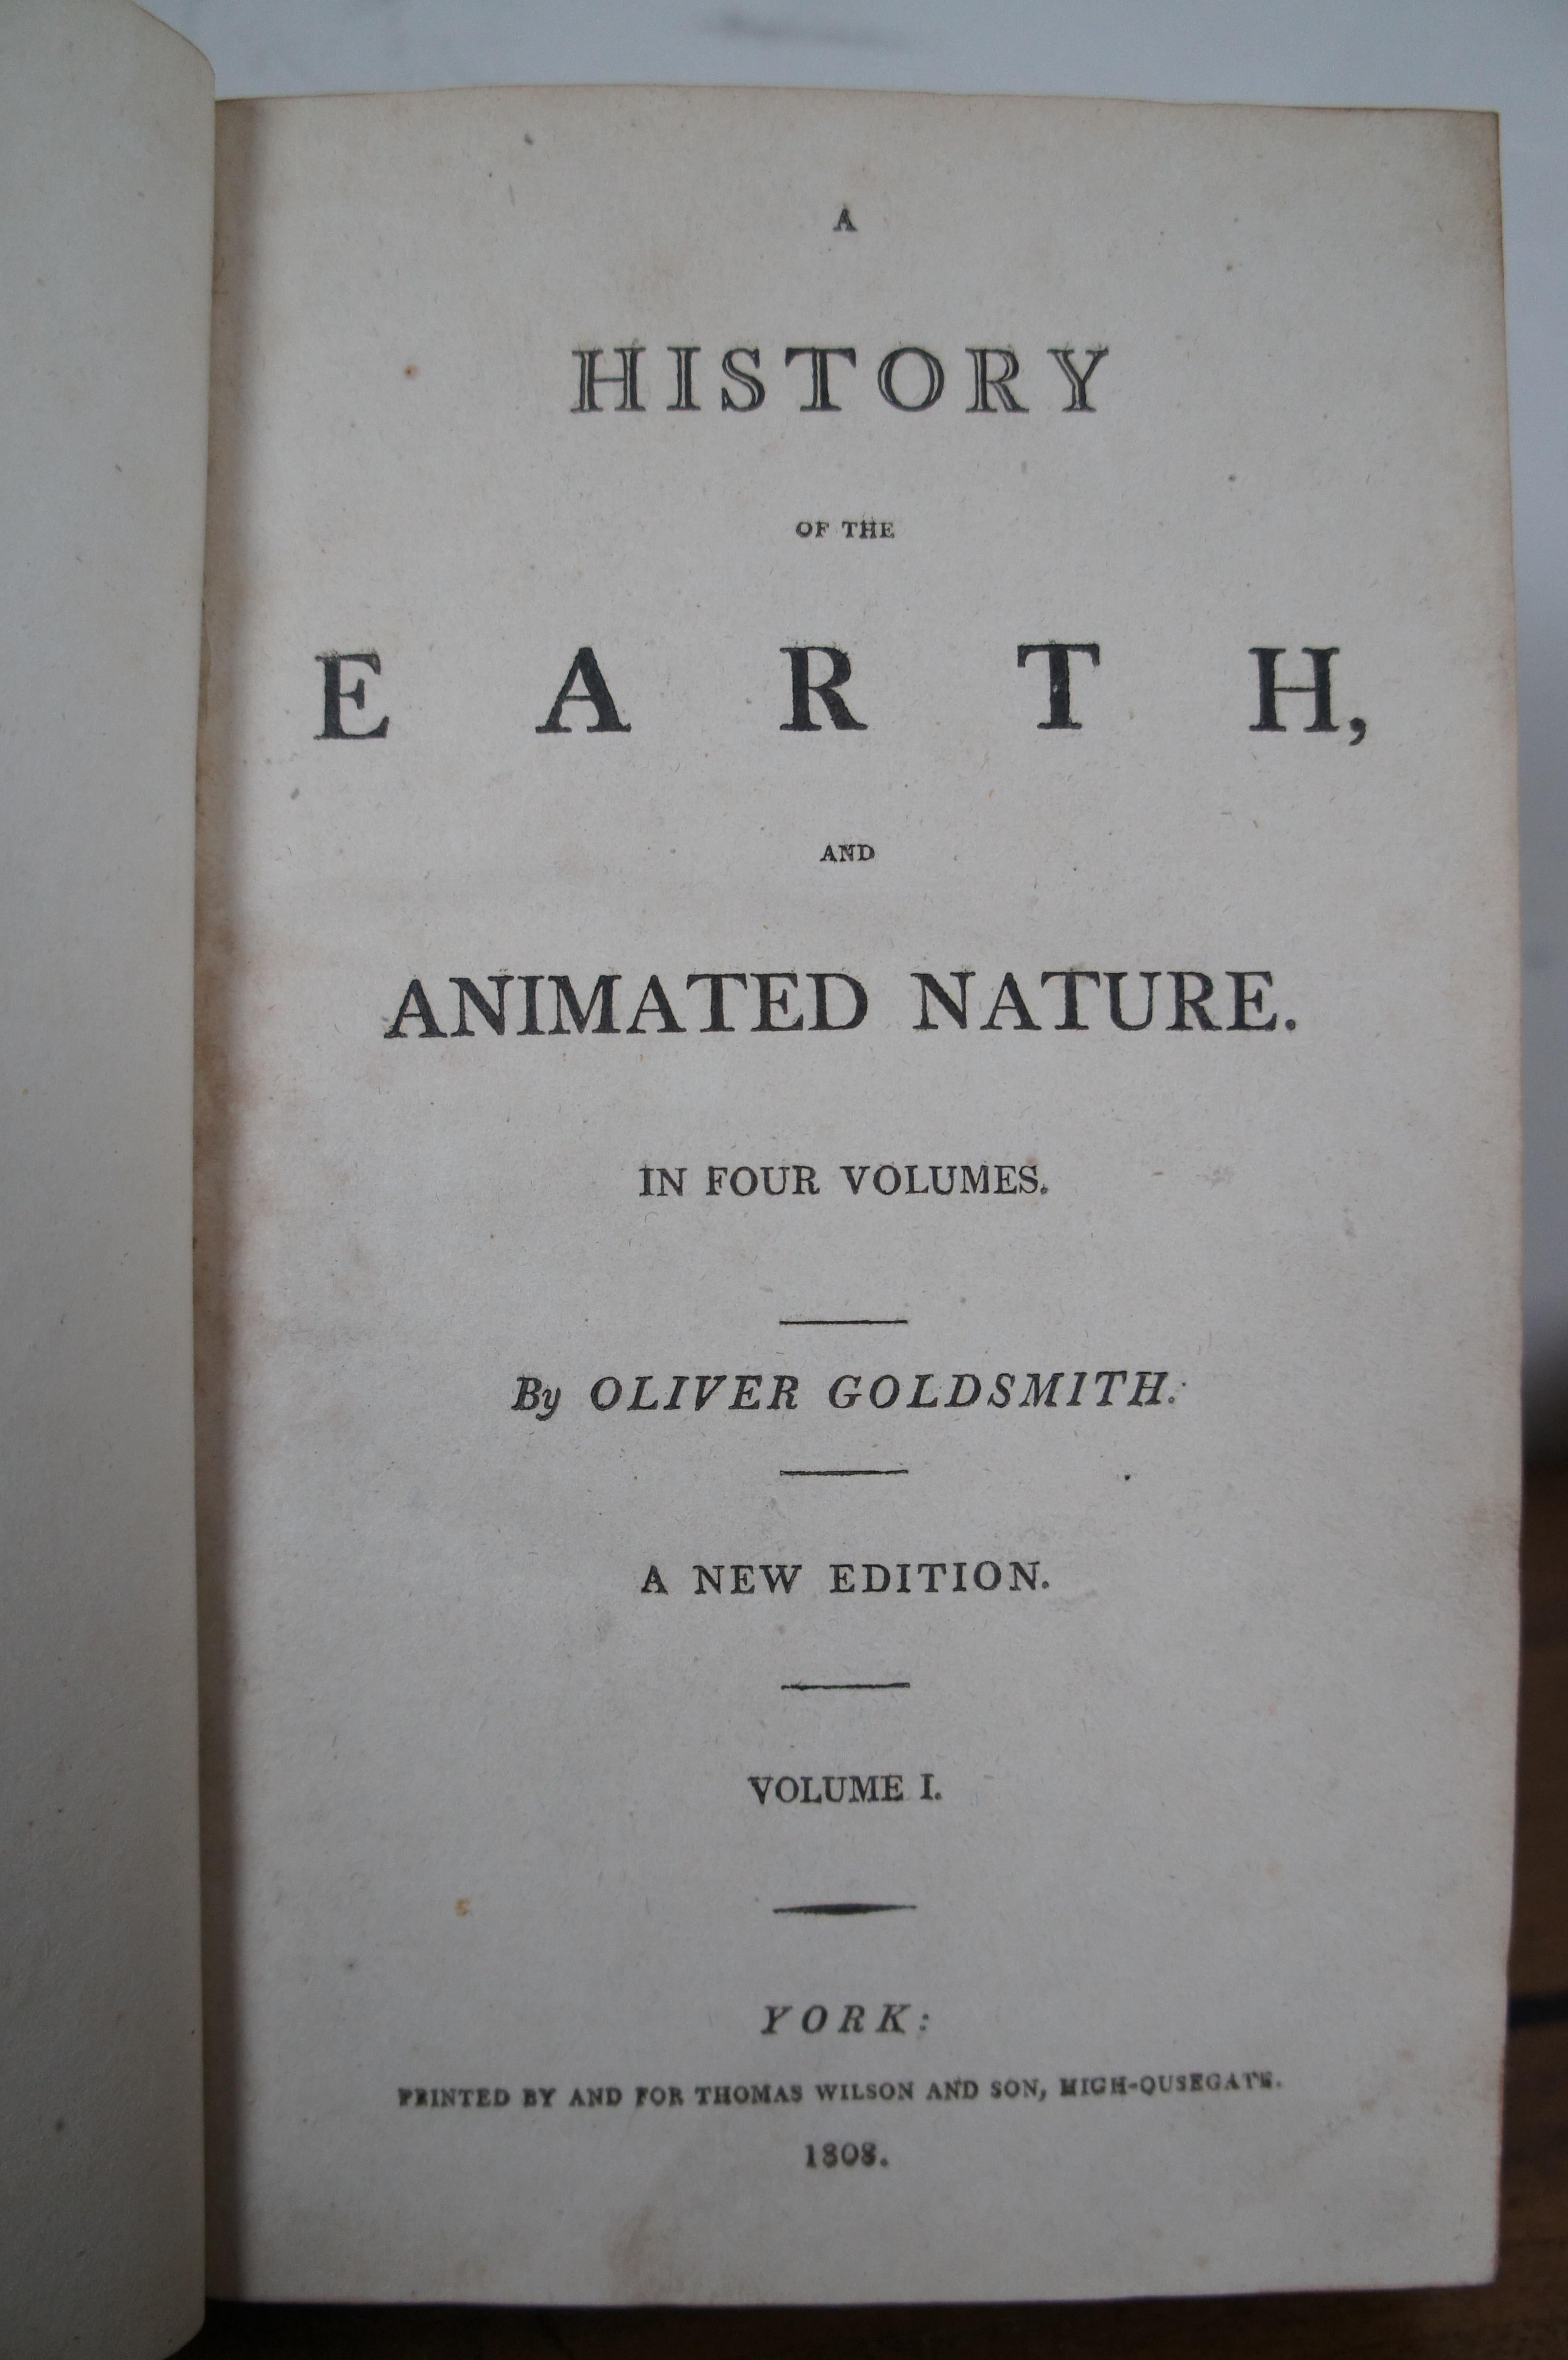 4 Livres anciens Goldsmiths History of Earth Animated Nature Leather Vol I-IV, 1808 en vente 6